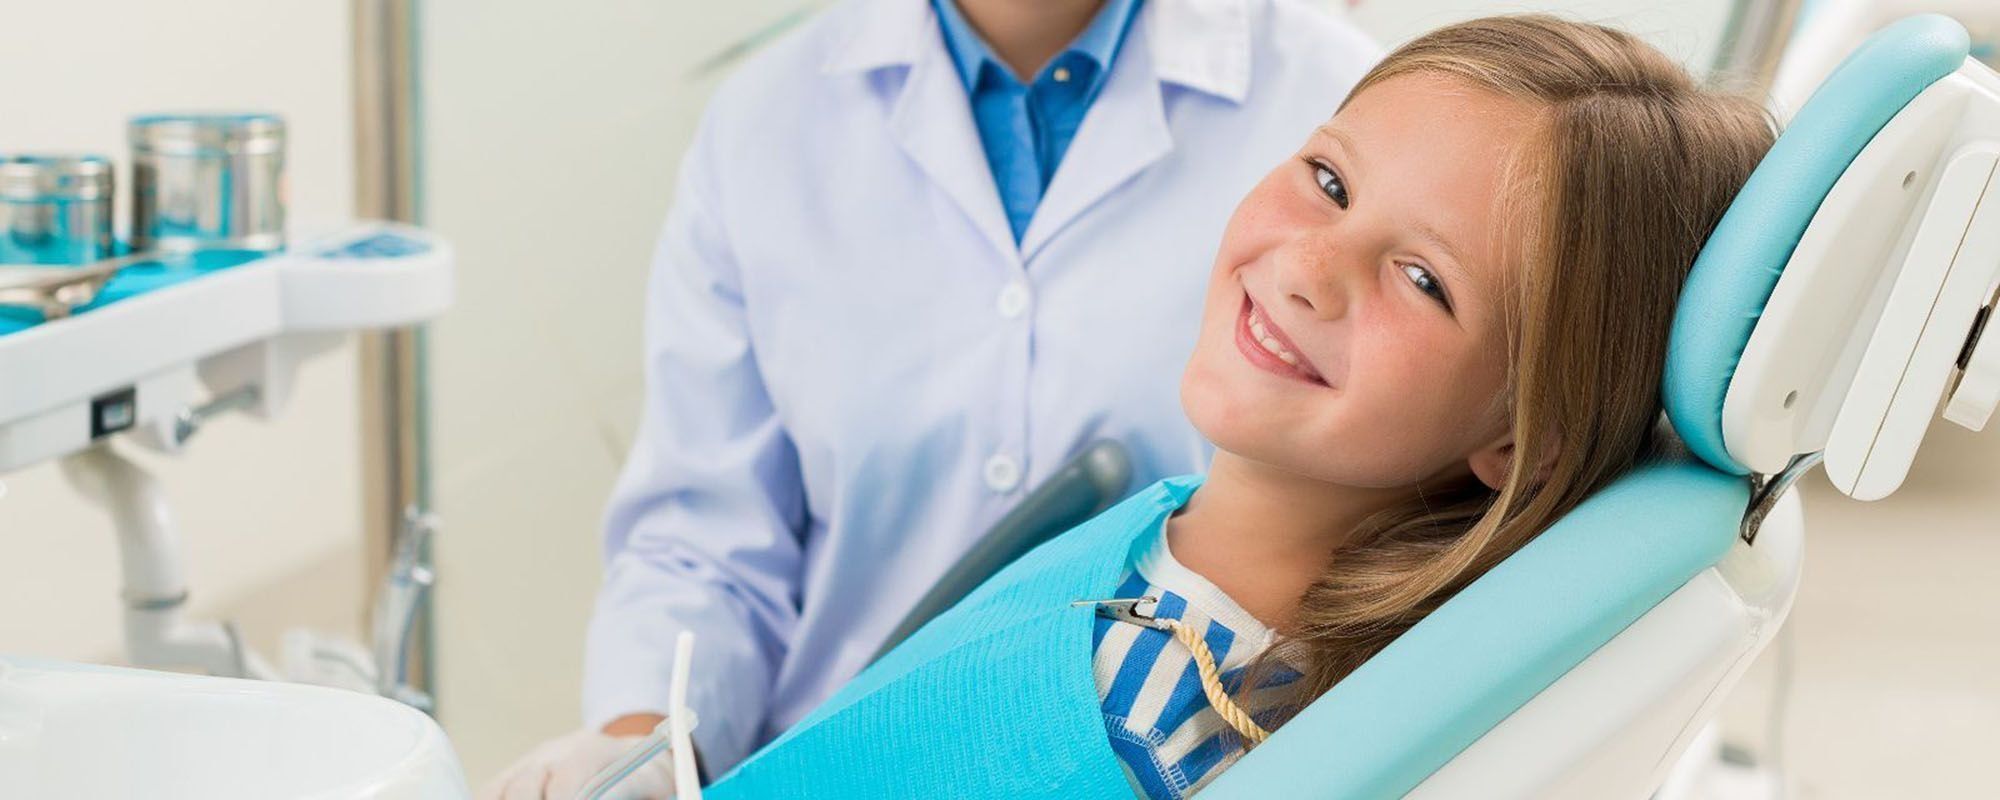 The best paid dental clinics for children in St. Petersburg in 2022